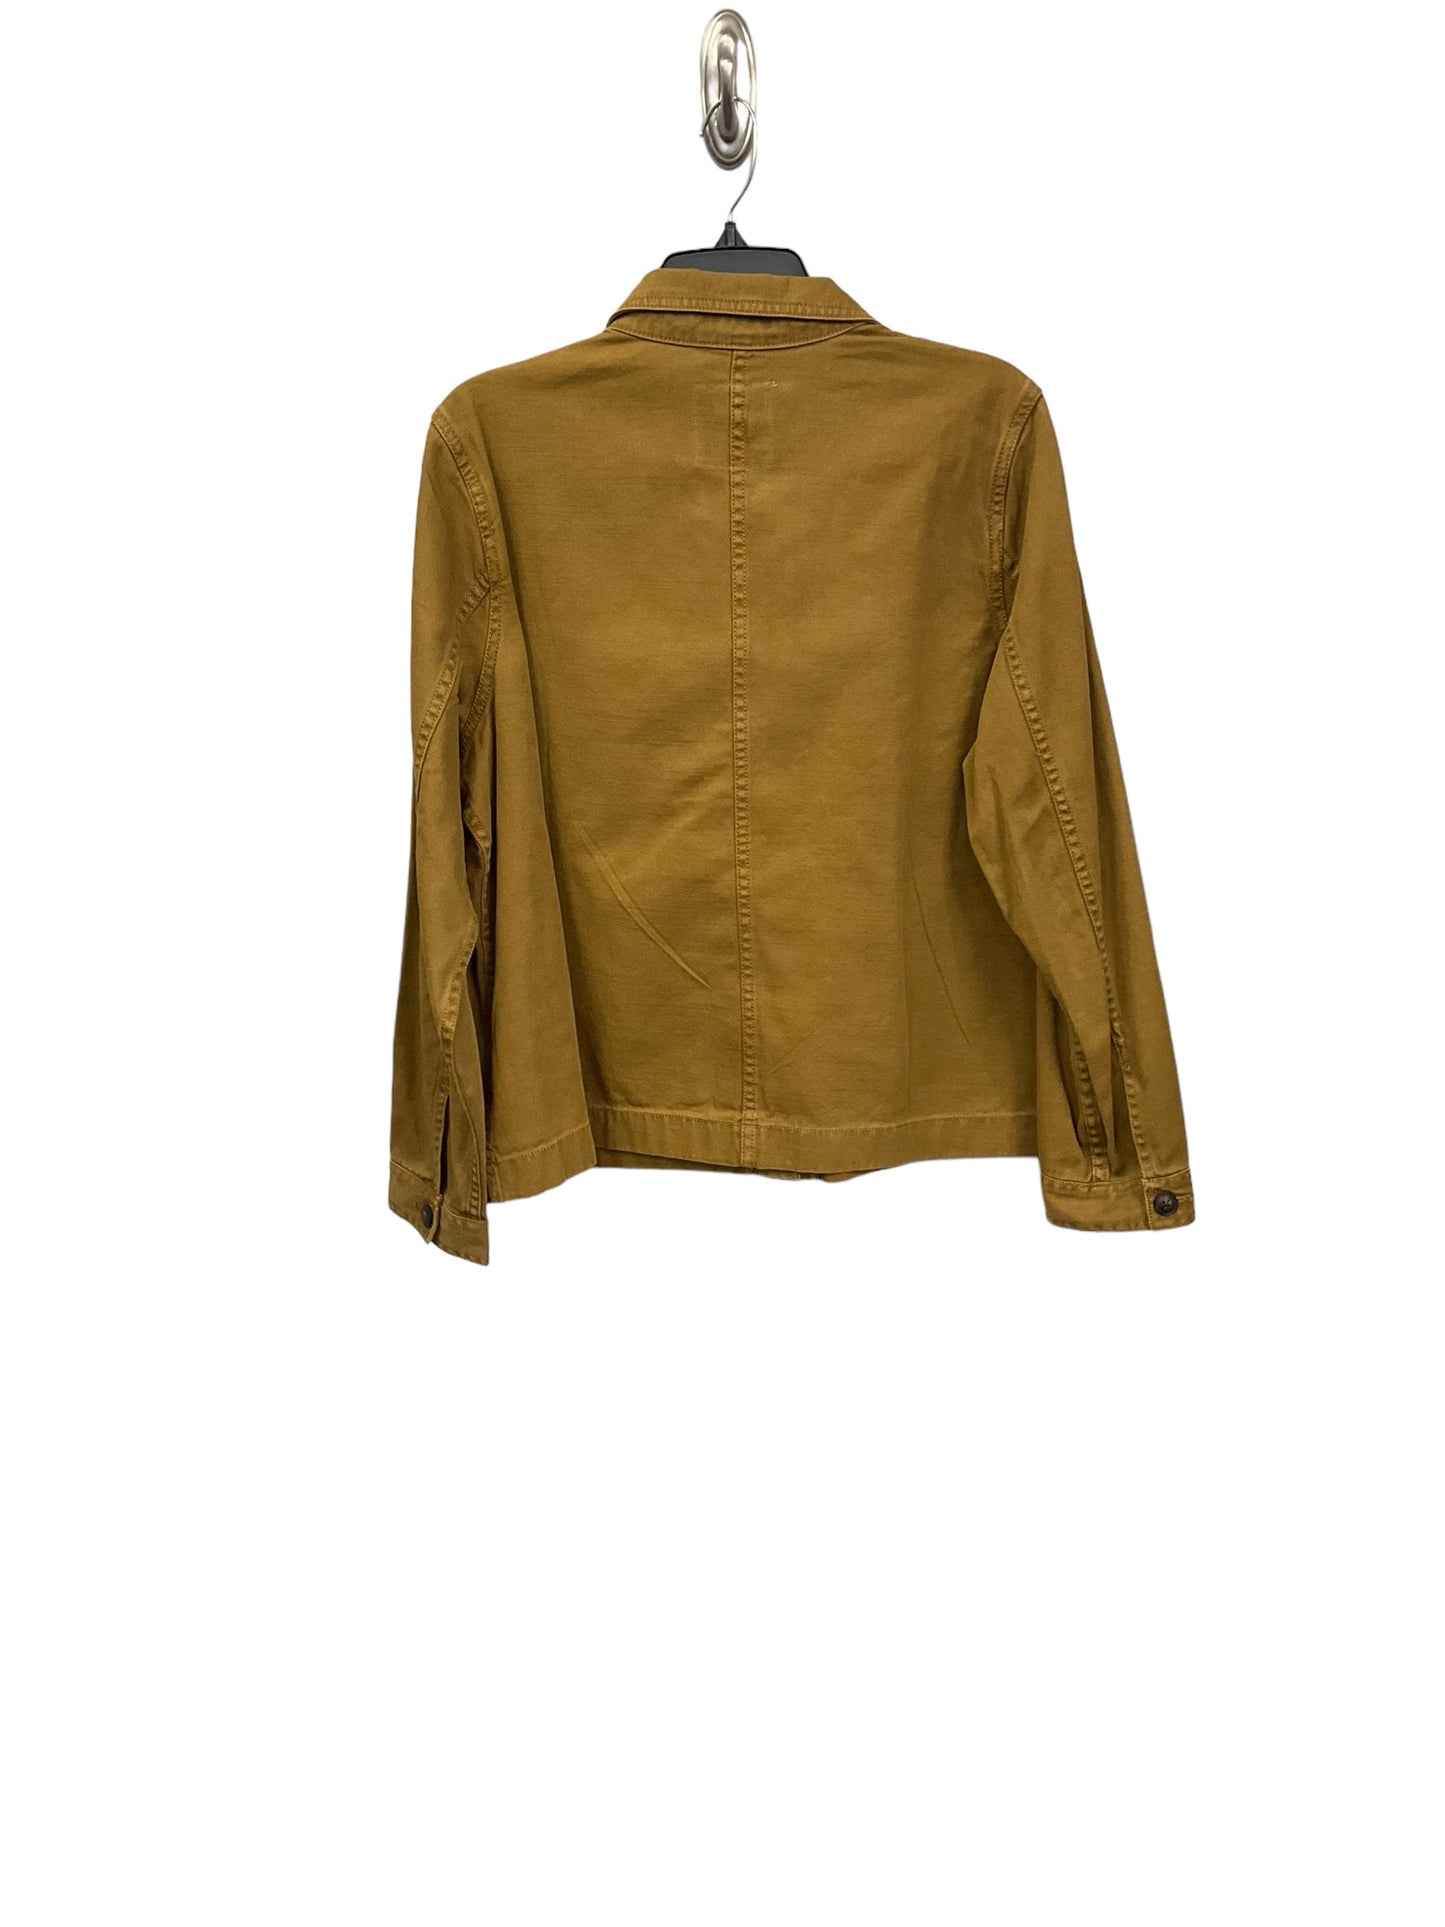 Gold Jacket Other Madewell, Size Xl